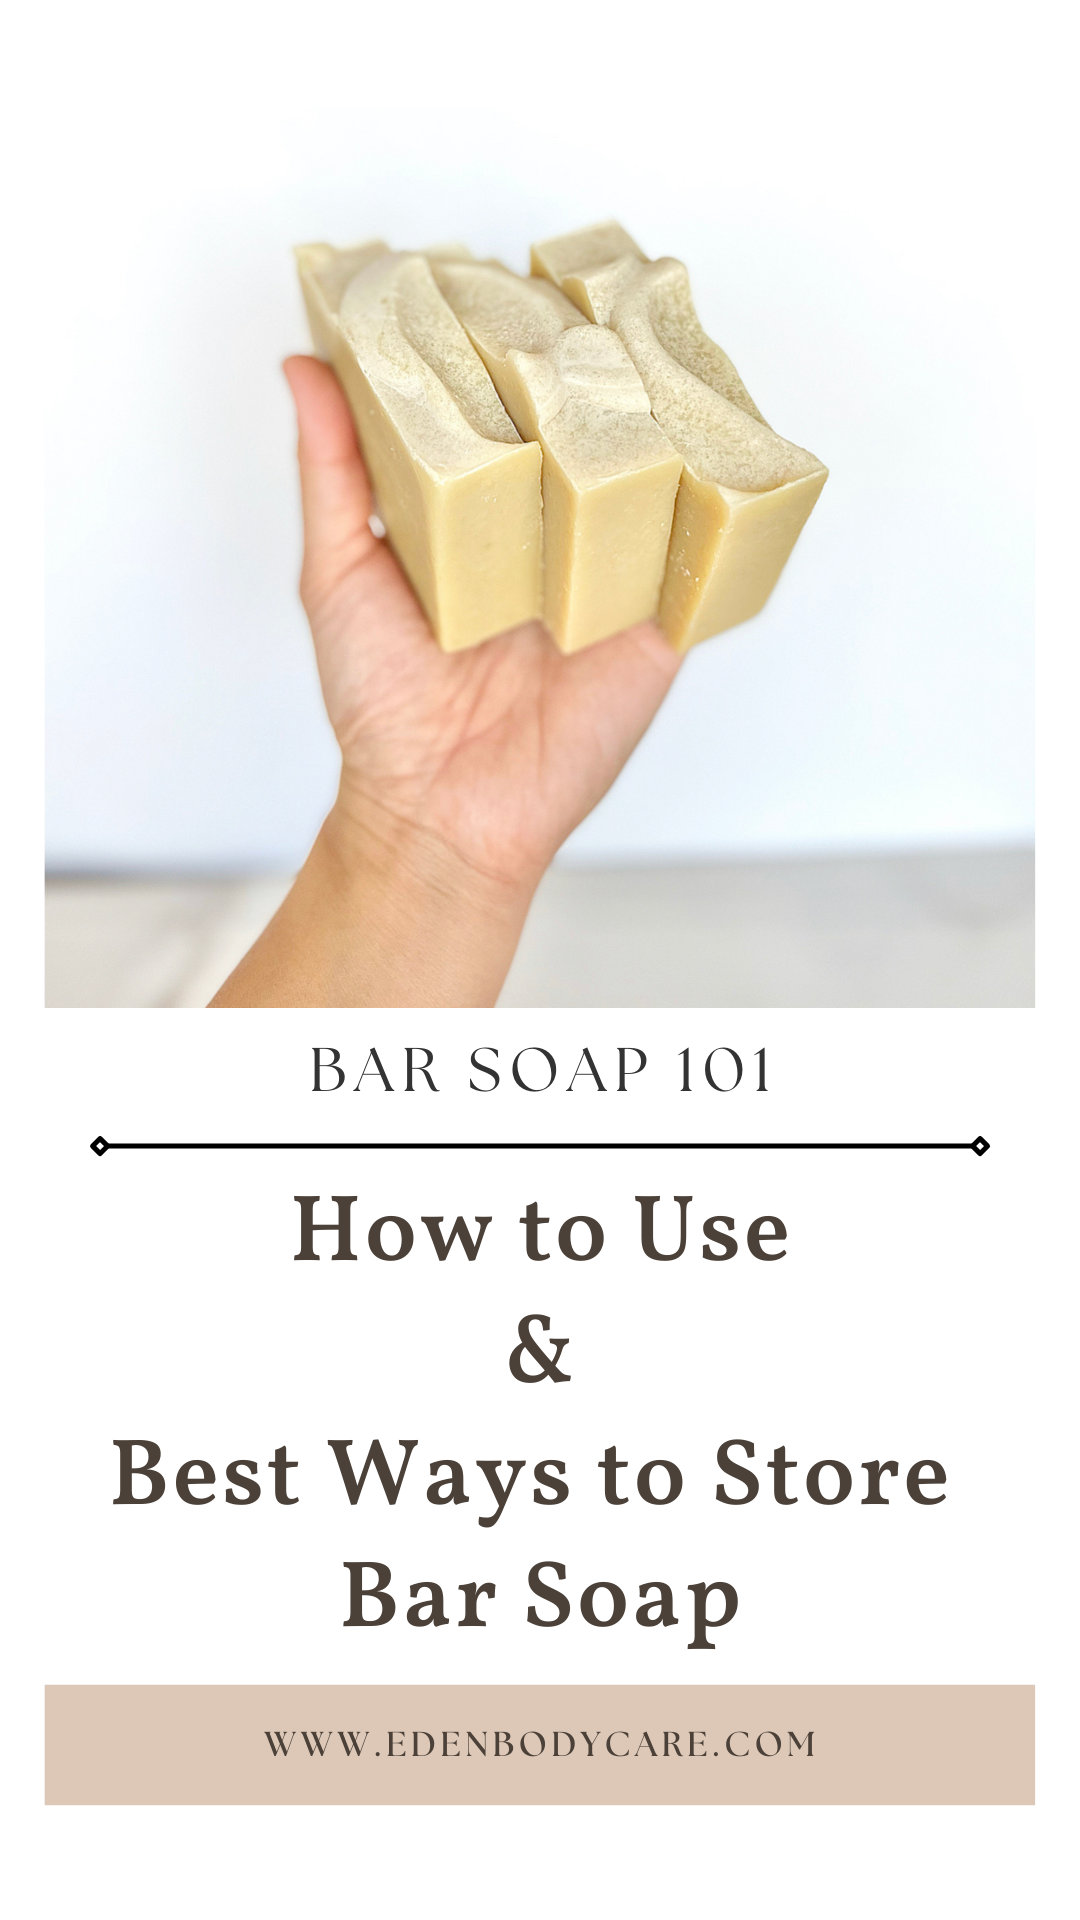 The Soapery Bar